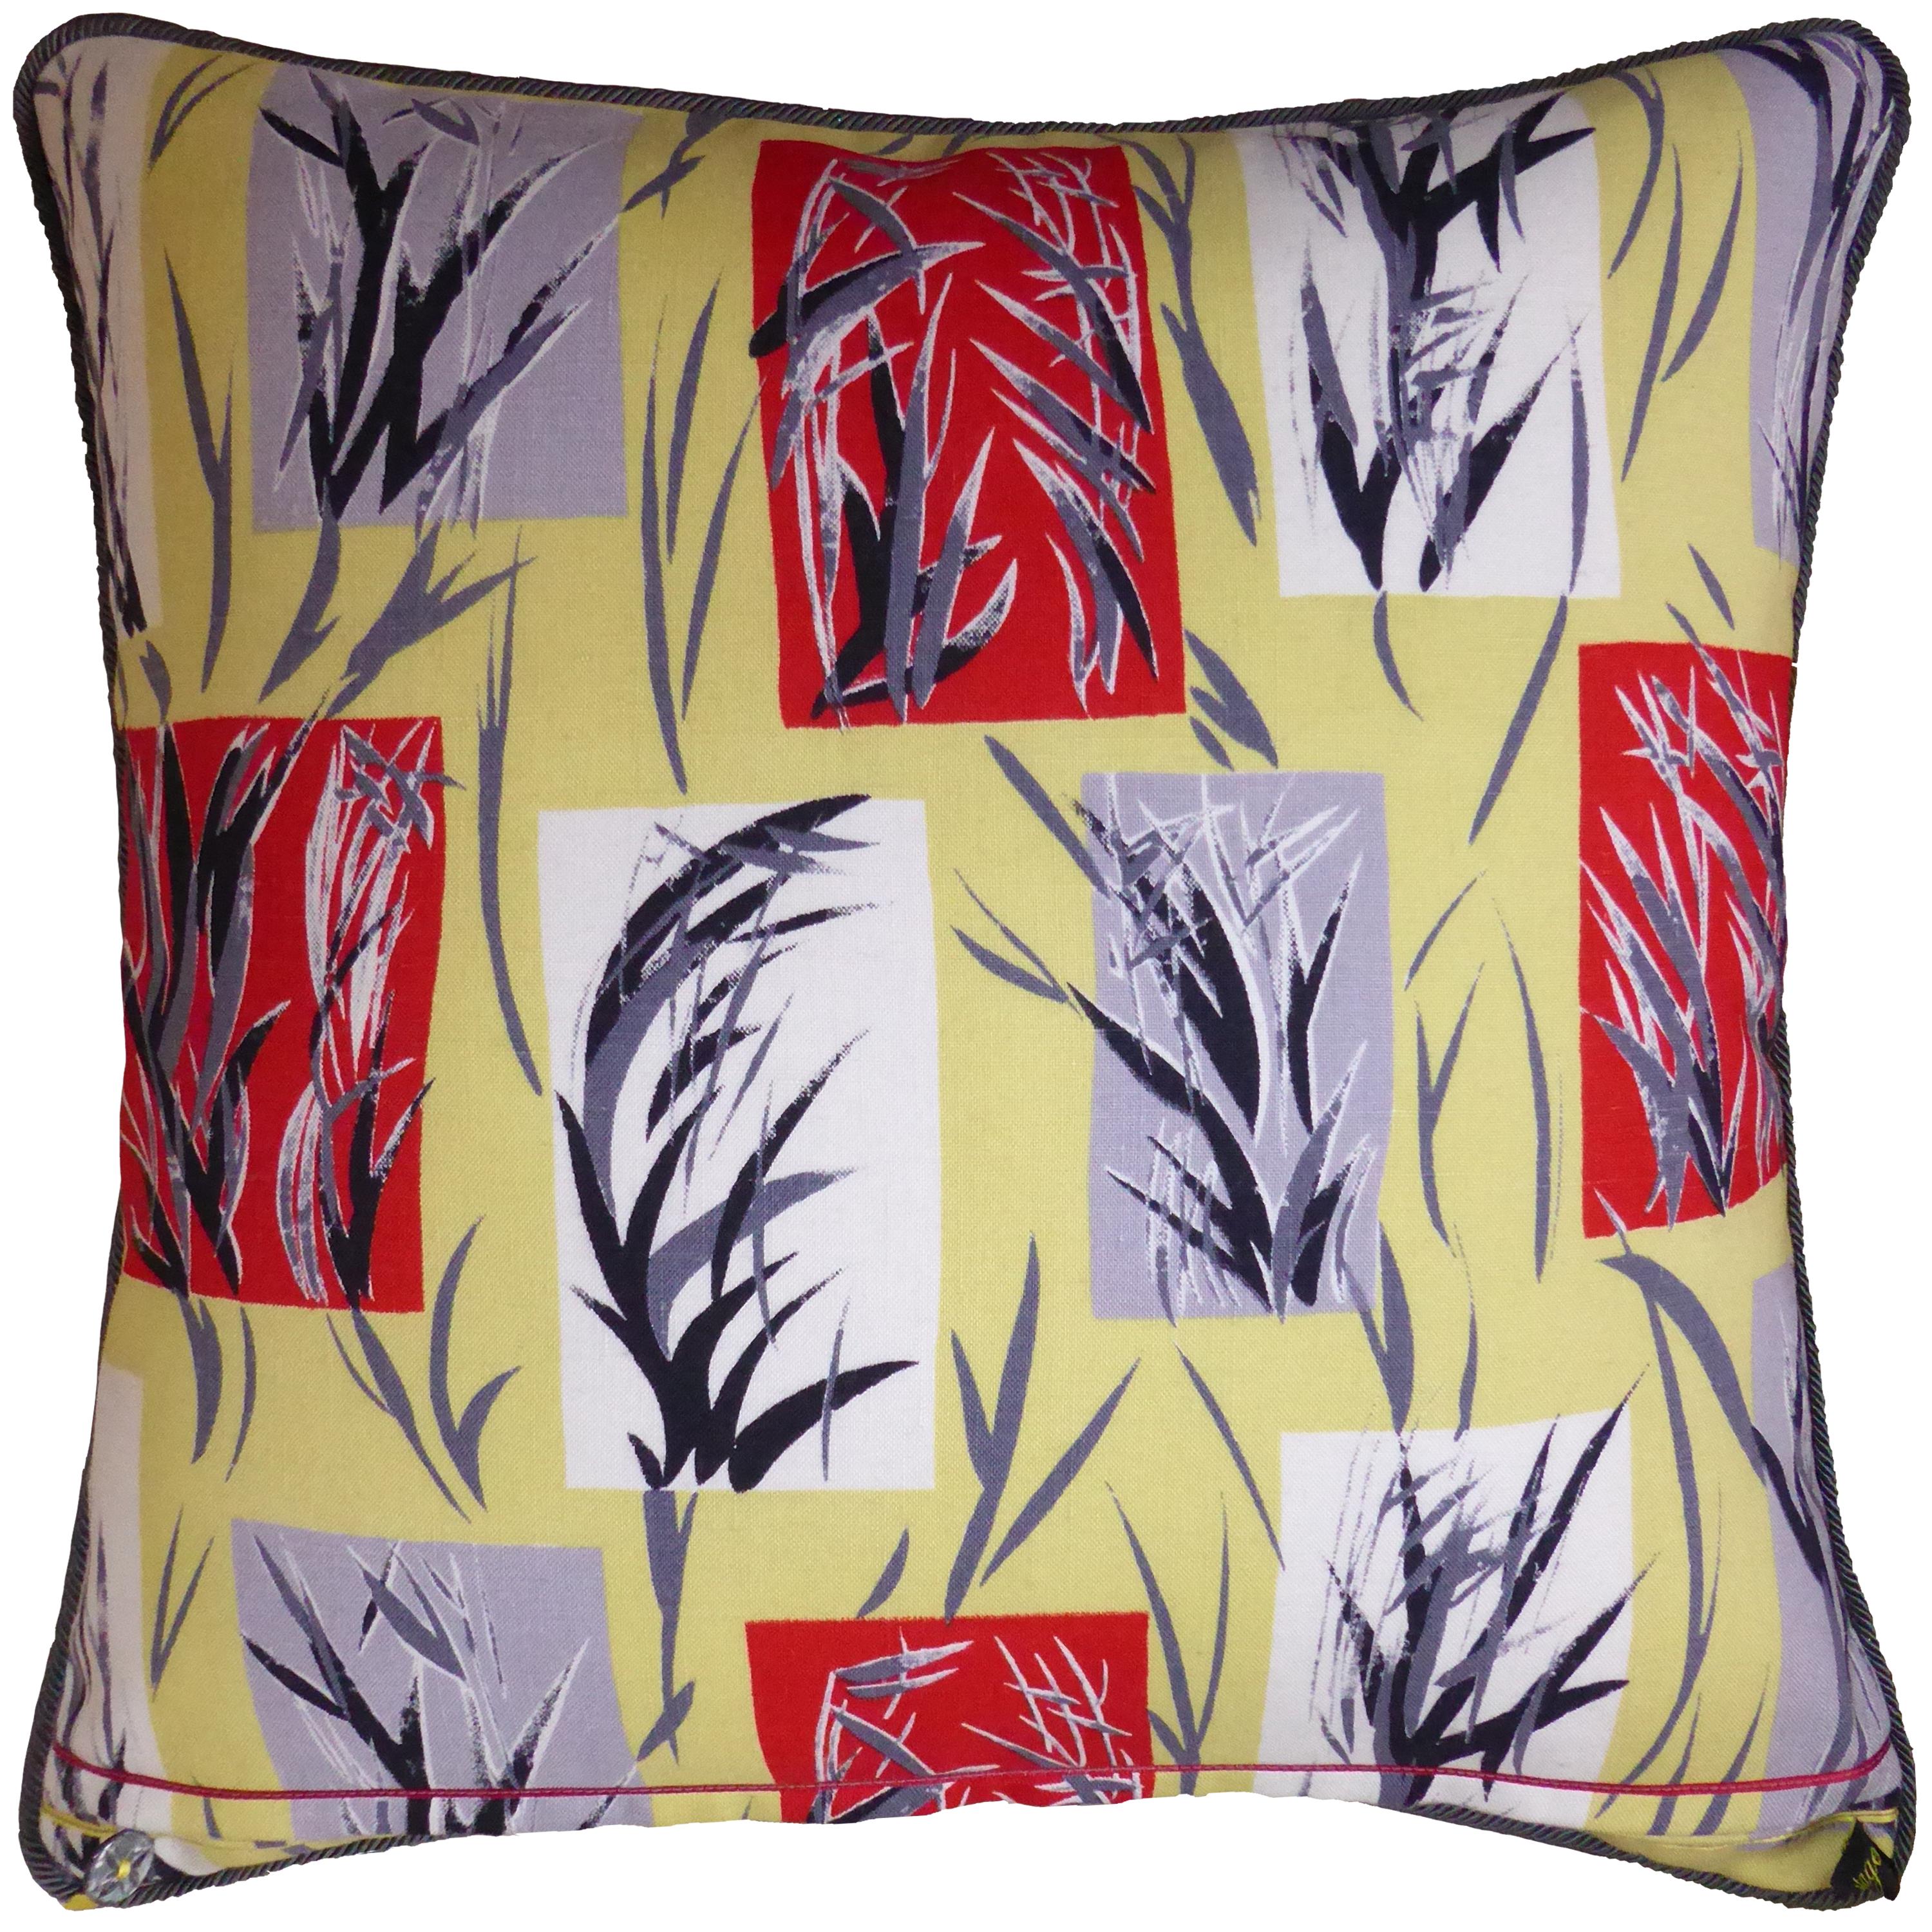 'Bamboo Leaves',
circa 1950 
British made luxury cushion created by using original vintage furnishing fabric in a popular midcentury style. Featuring a minimalistic ‘nature’ theme 
Provenance: Britain
Made by Nichollette Yardley-Moore 
Vintage